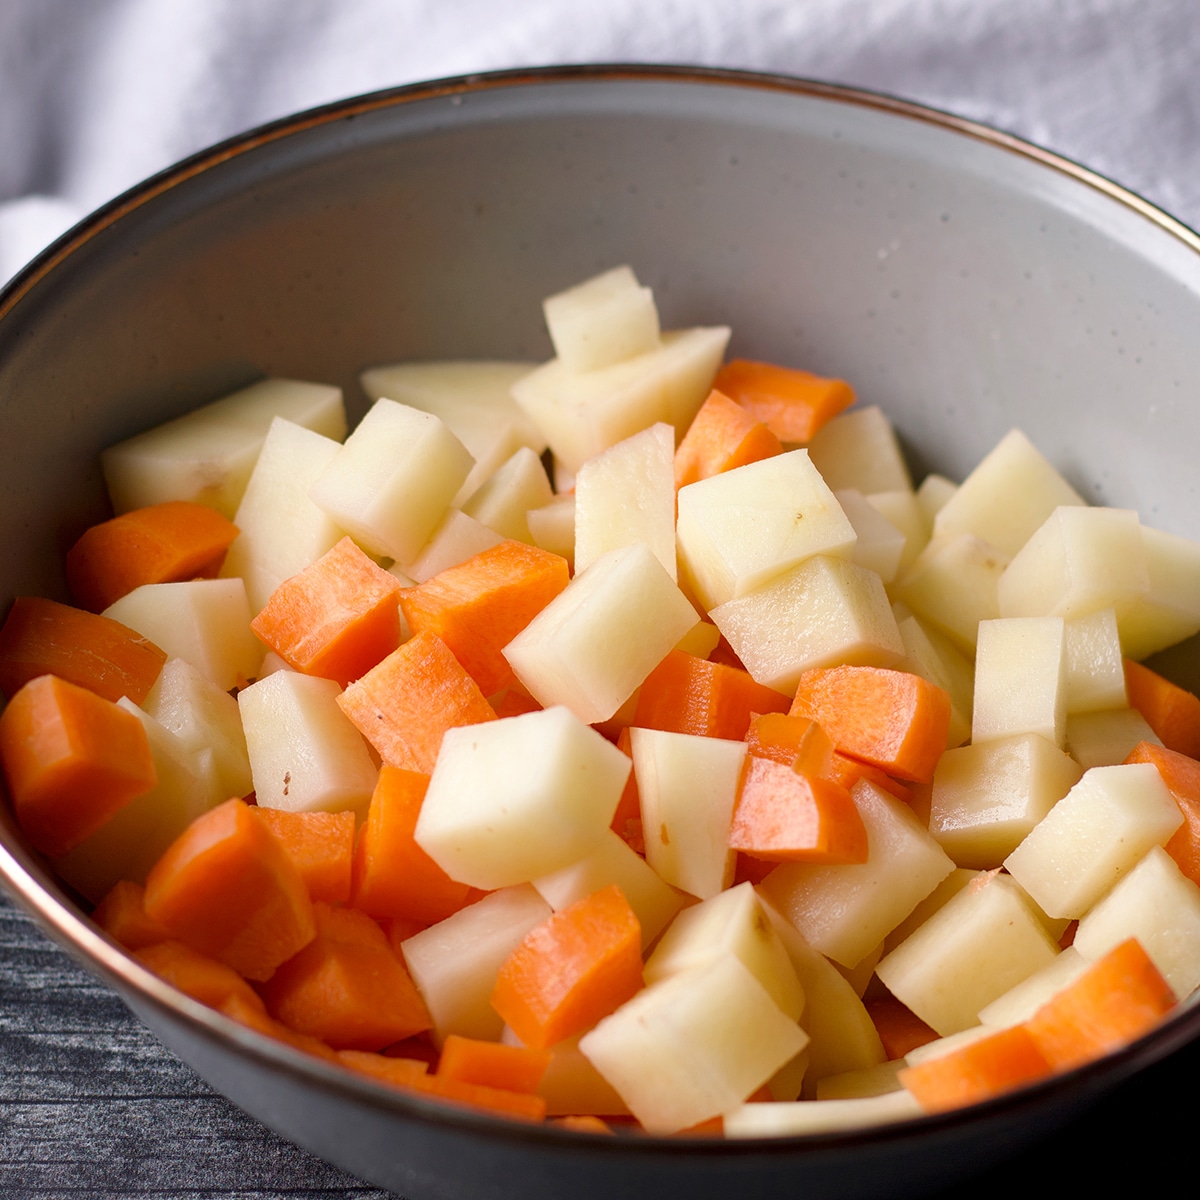 A blue bowl filled with chopped potatoes and carrots.